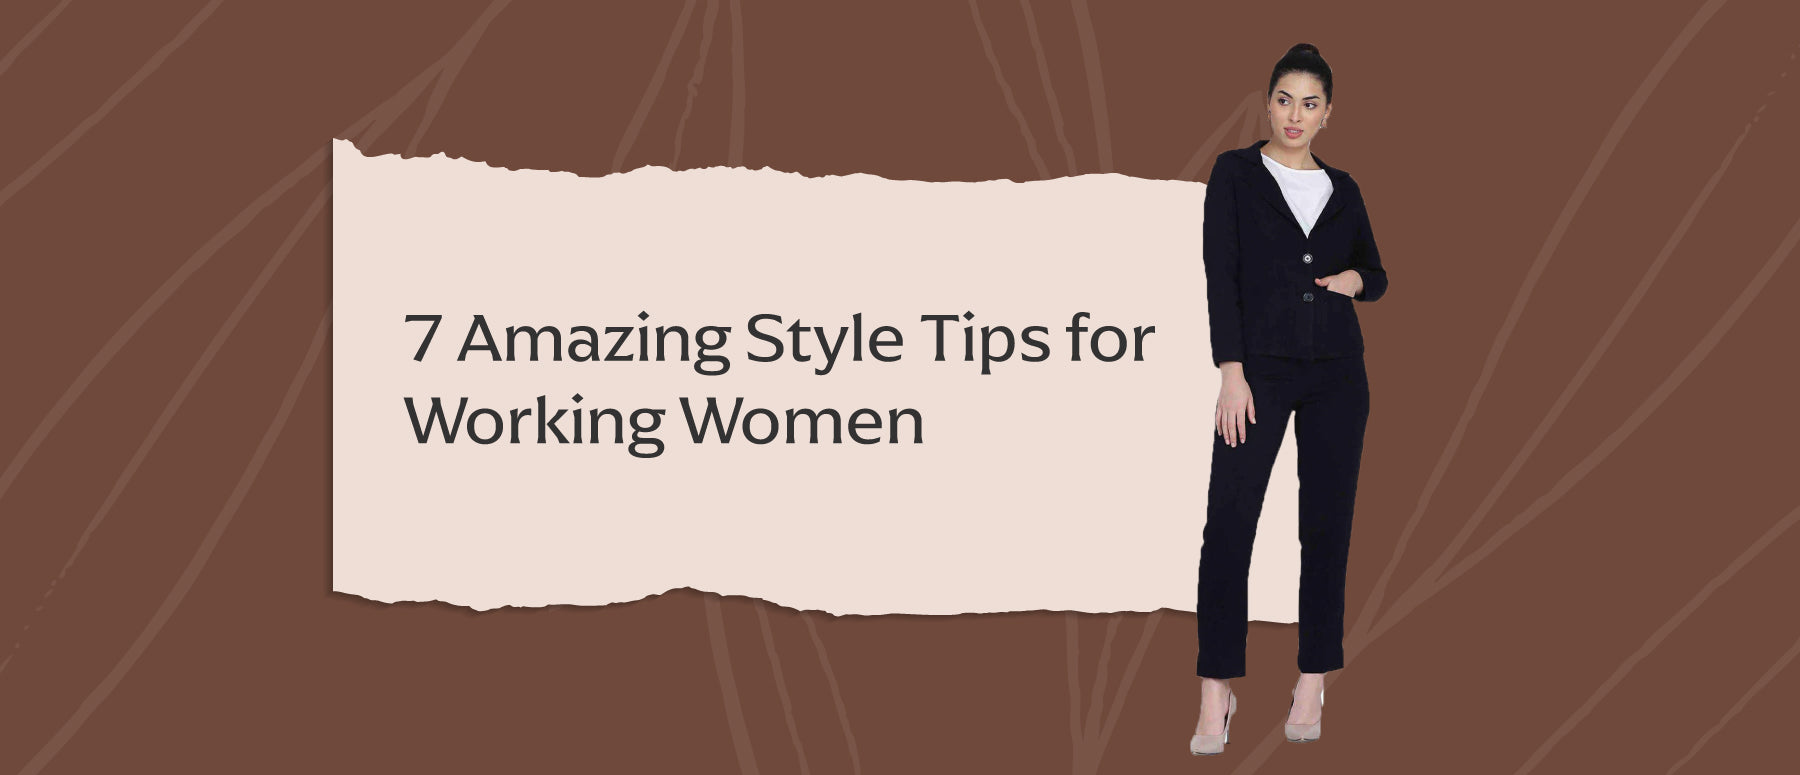 7 Amazing Style Tips for Working Women